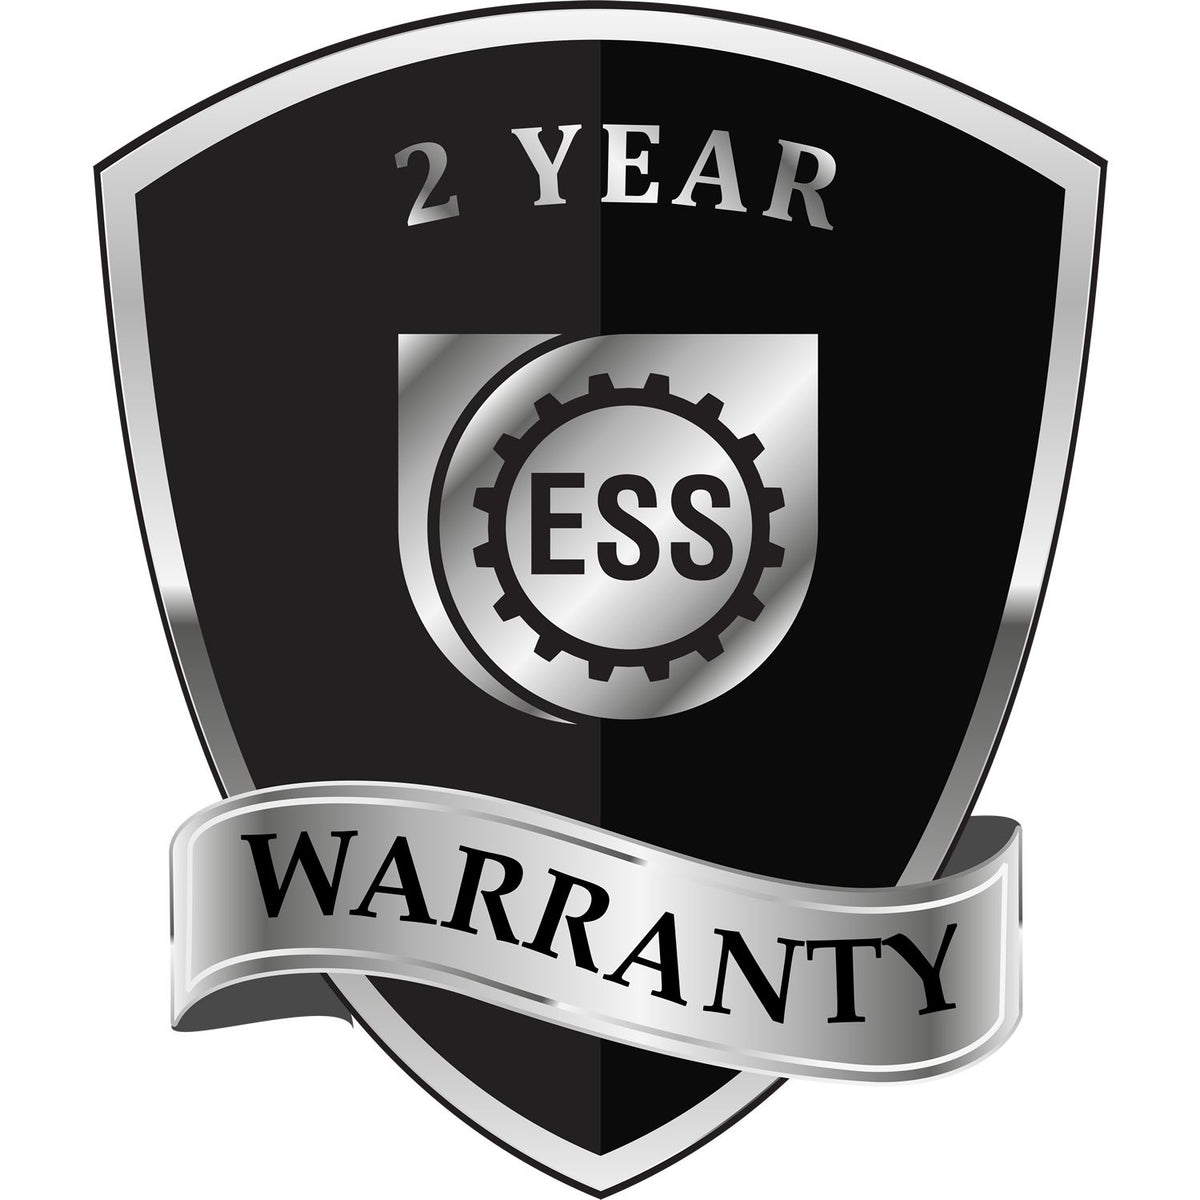 A black and silver badge or emblem showing warranty information for the Gift Hawaii Architect Seal